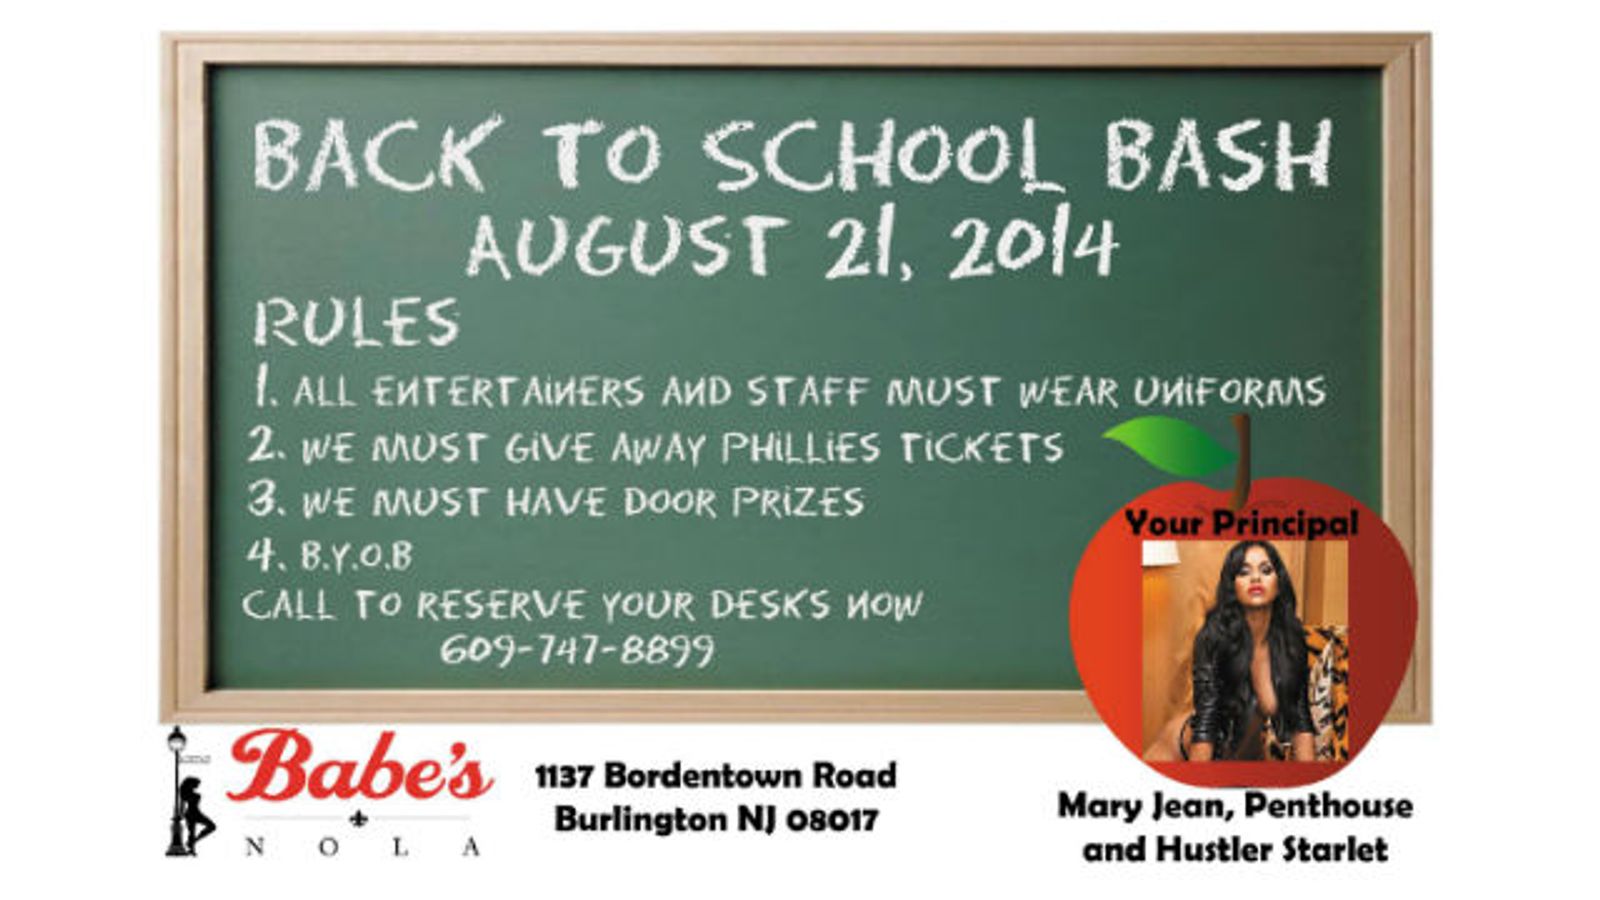 Maryjean Features at Babe’s Nola for “Back to School” Event August 21